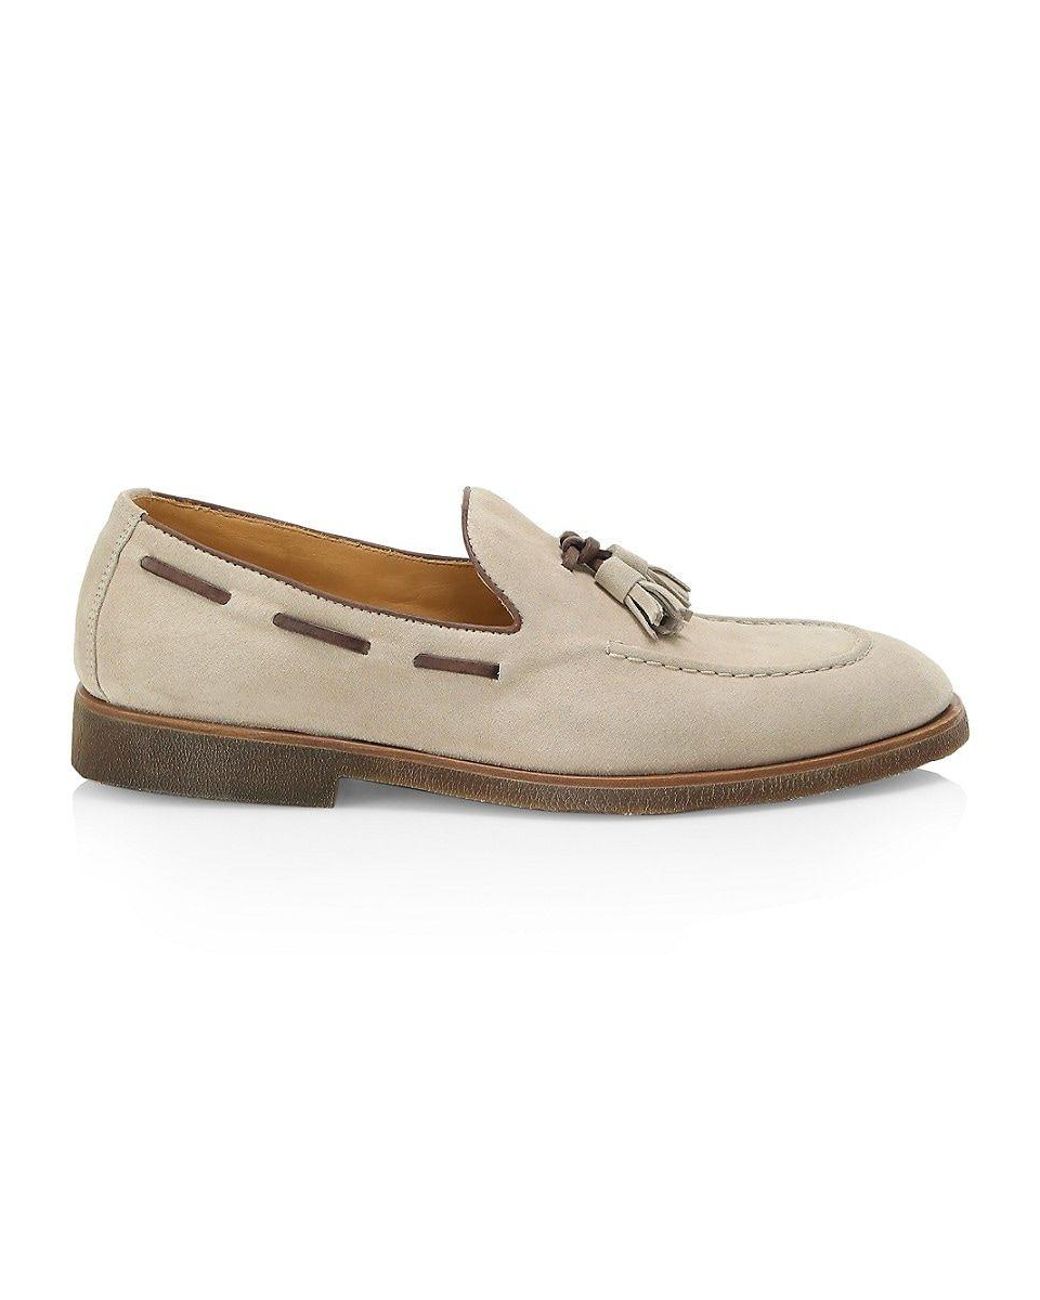 Brunello Cucinelli Suede Tassel Loafers in Natural for Men | Lyst